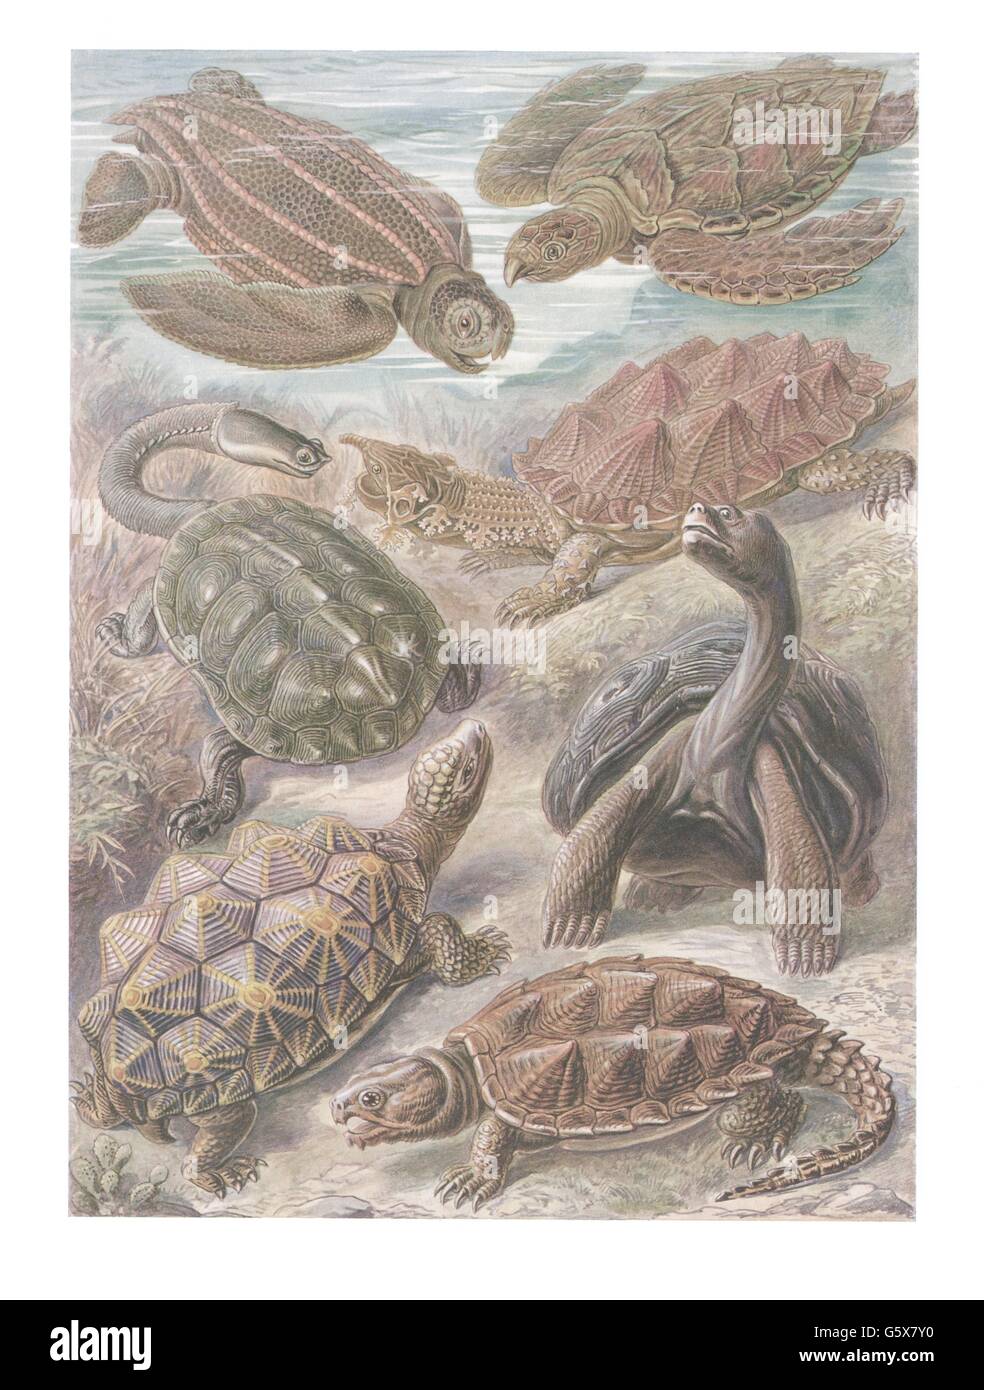 zoology / animals, reptiles, turtles (Chelonii), colour lithograph, out of: Ernst Haeckel, 'Kunstformen der Natur', Leipzig - Vienna, 1899 - 1904, Additional-Rights-Clearences-Not Available Stock Photo